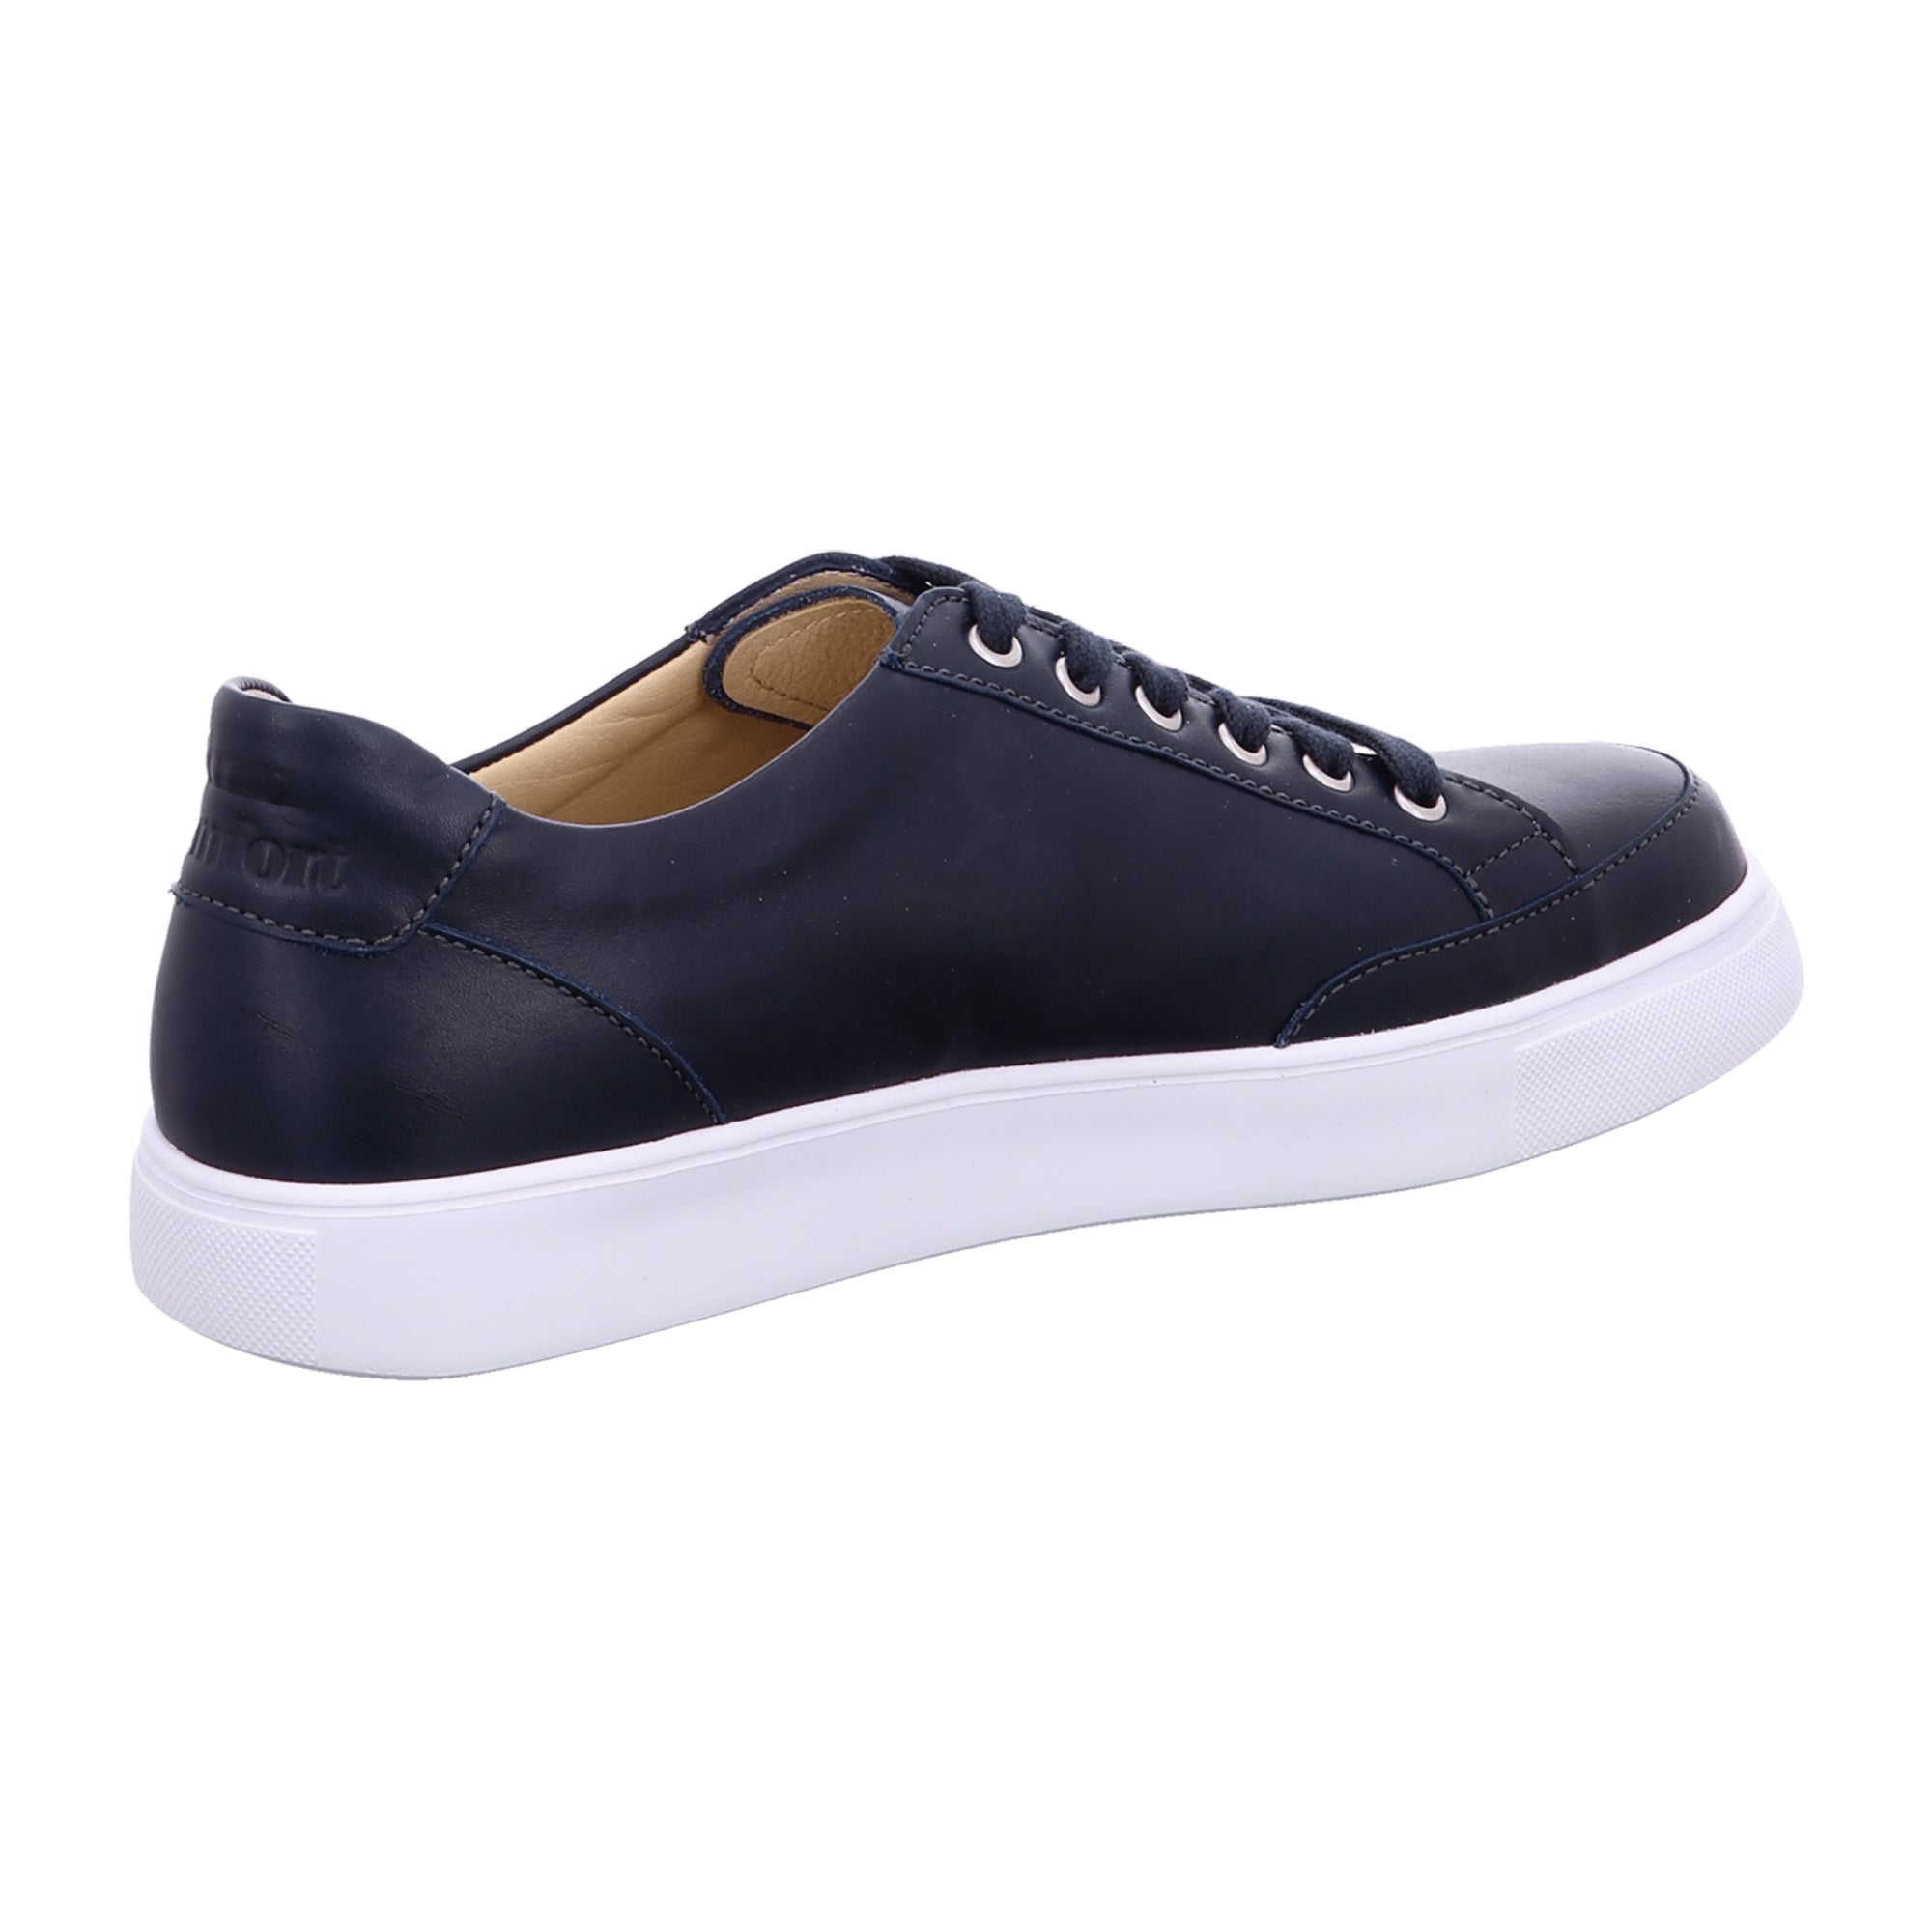 Finn Comfort Piccadilly Men's Shoes - Stylish & Durable Imported Blue Footwear